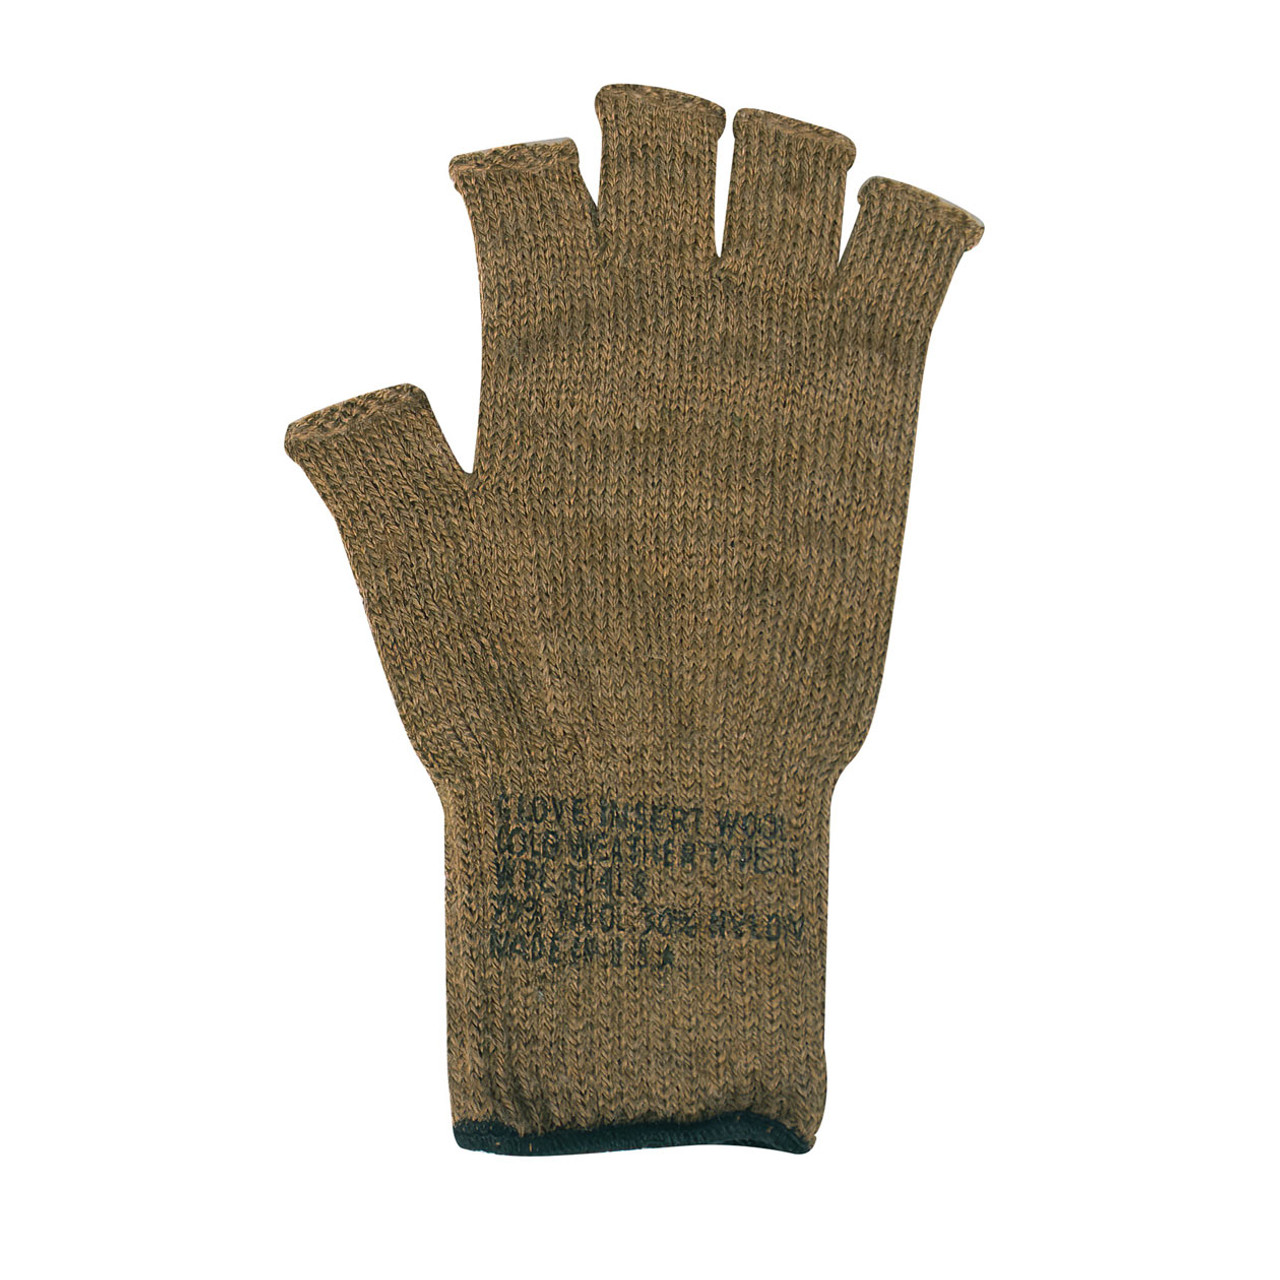 Shop Made USA Fingerless Wool Gloves - Fatigues Army Navy Gear